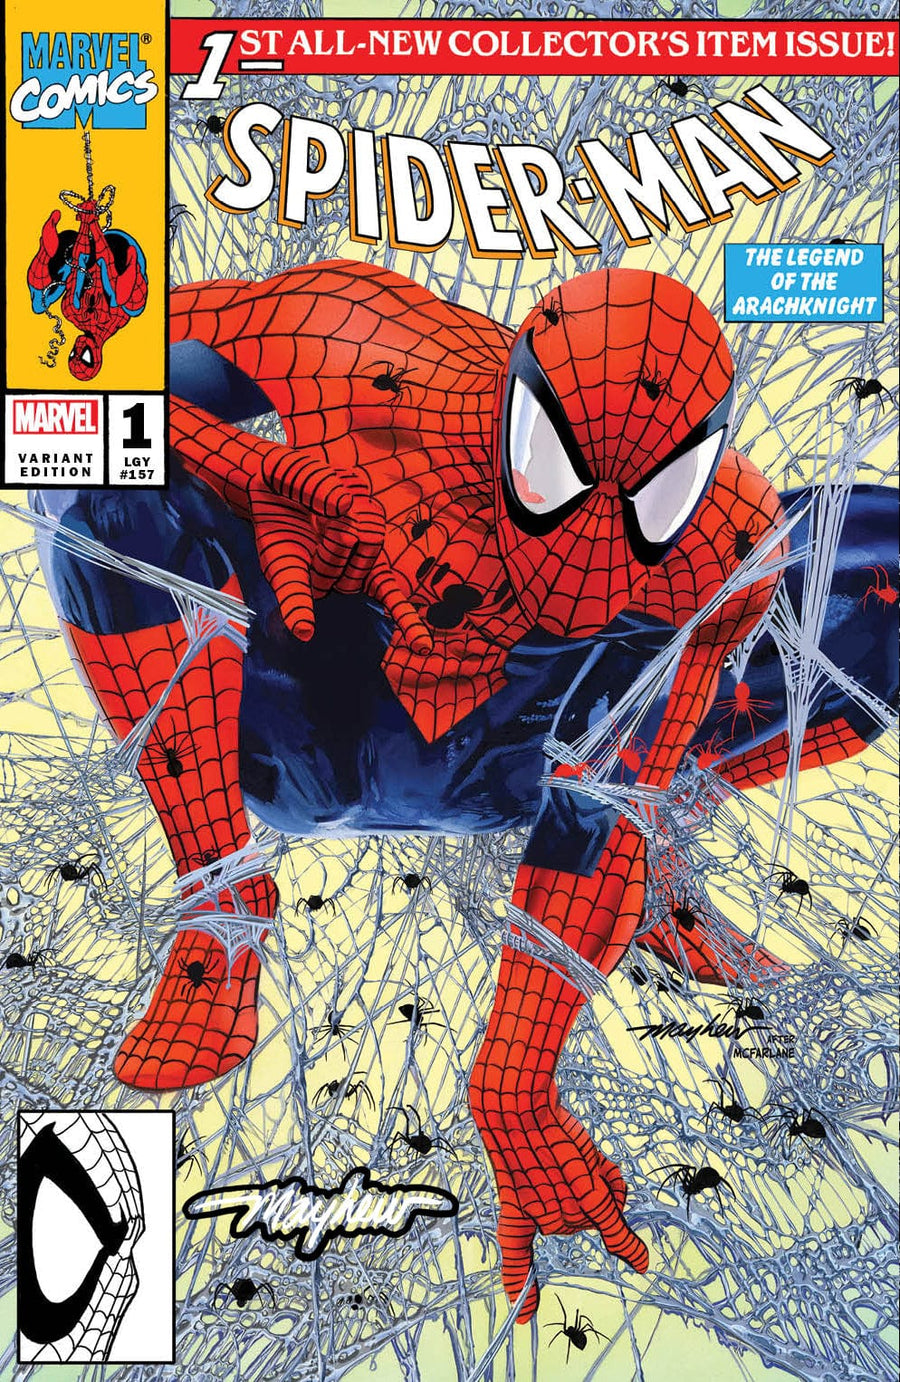 SPIDER-MAN #1 (2022) Mike Mayhew Studio Variant Cover A Trade Dress Radioactive Glow Sig with COA